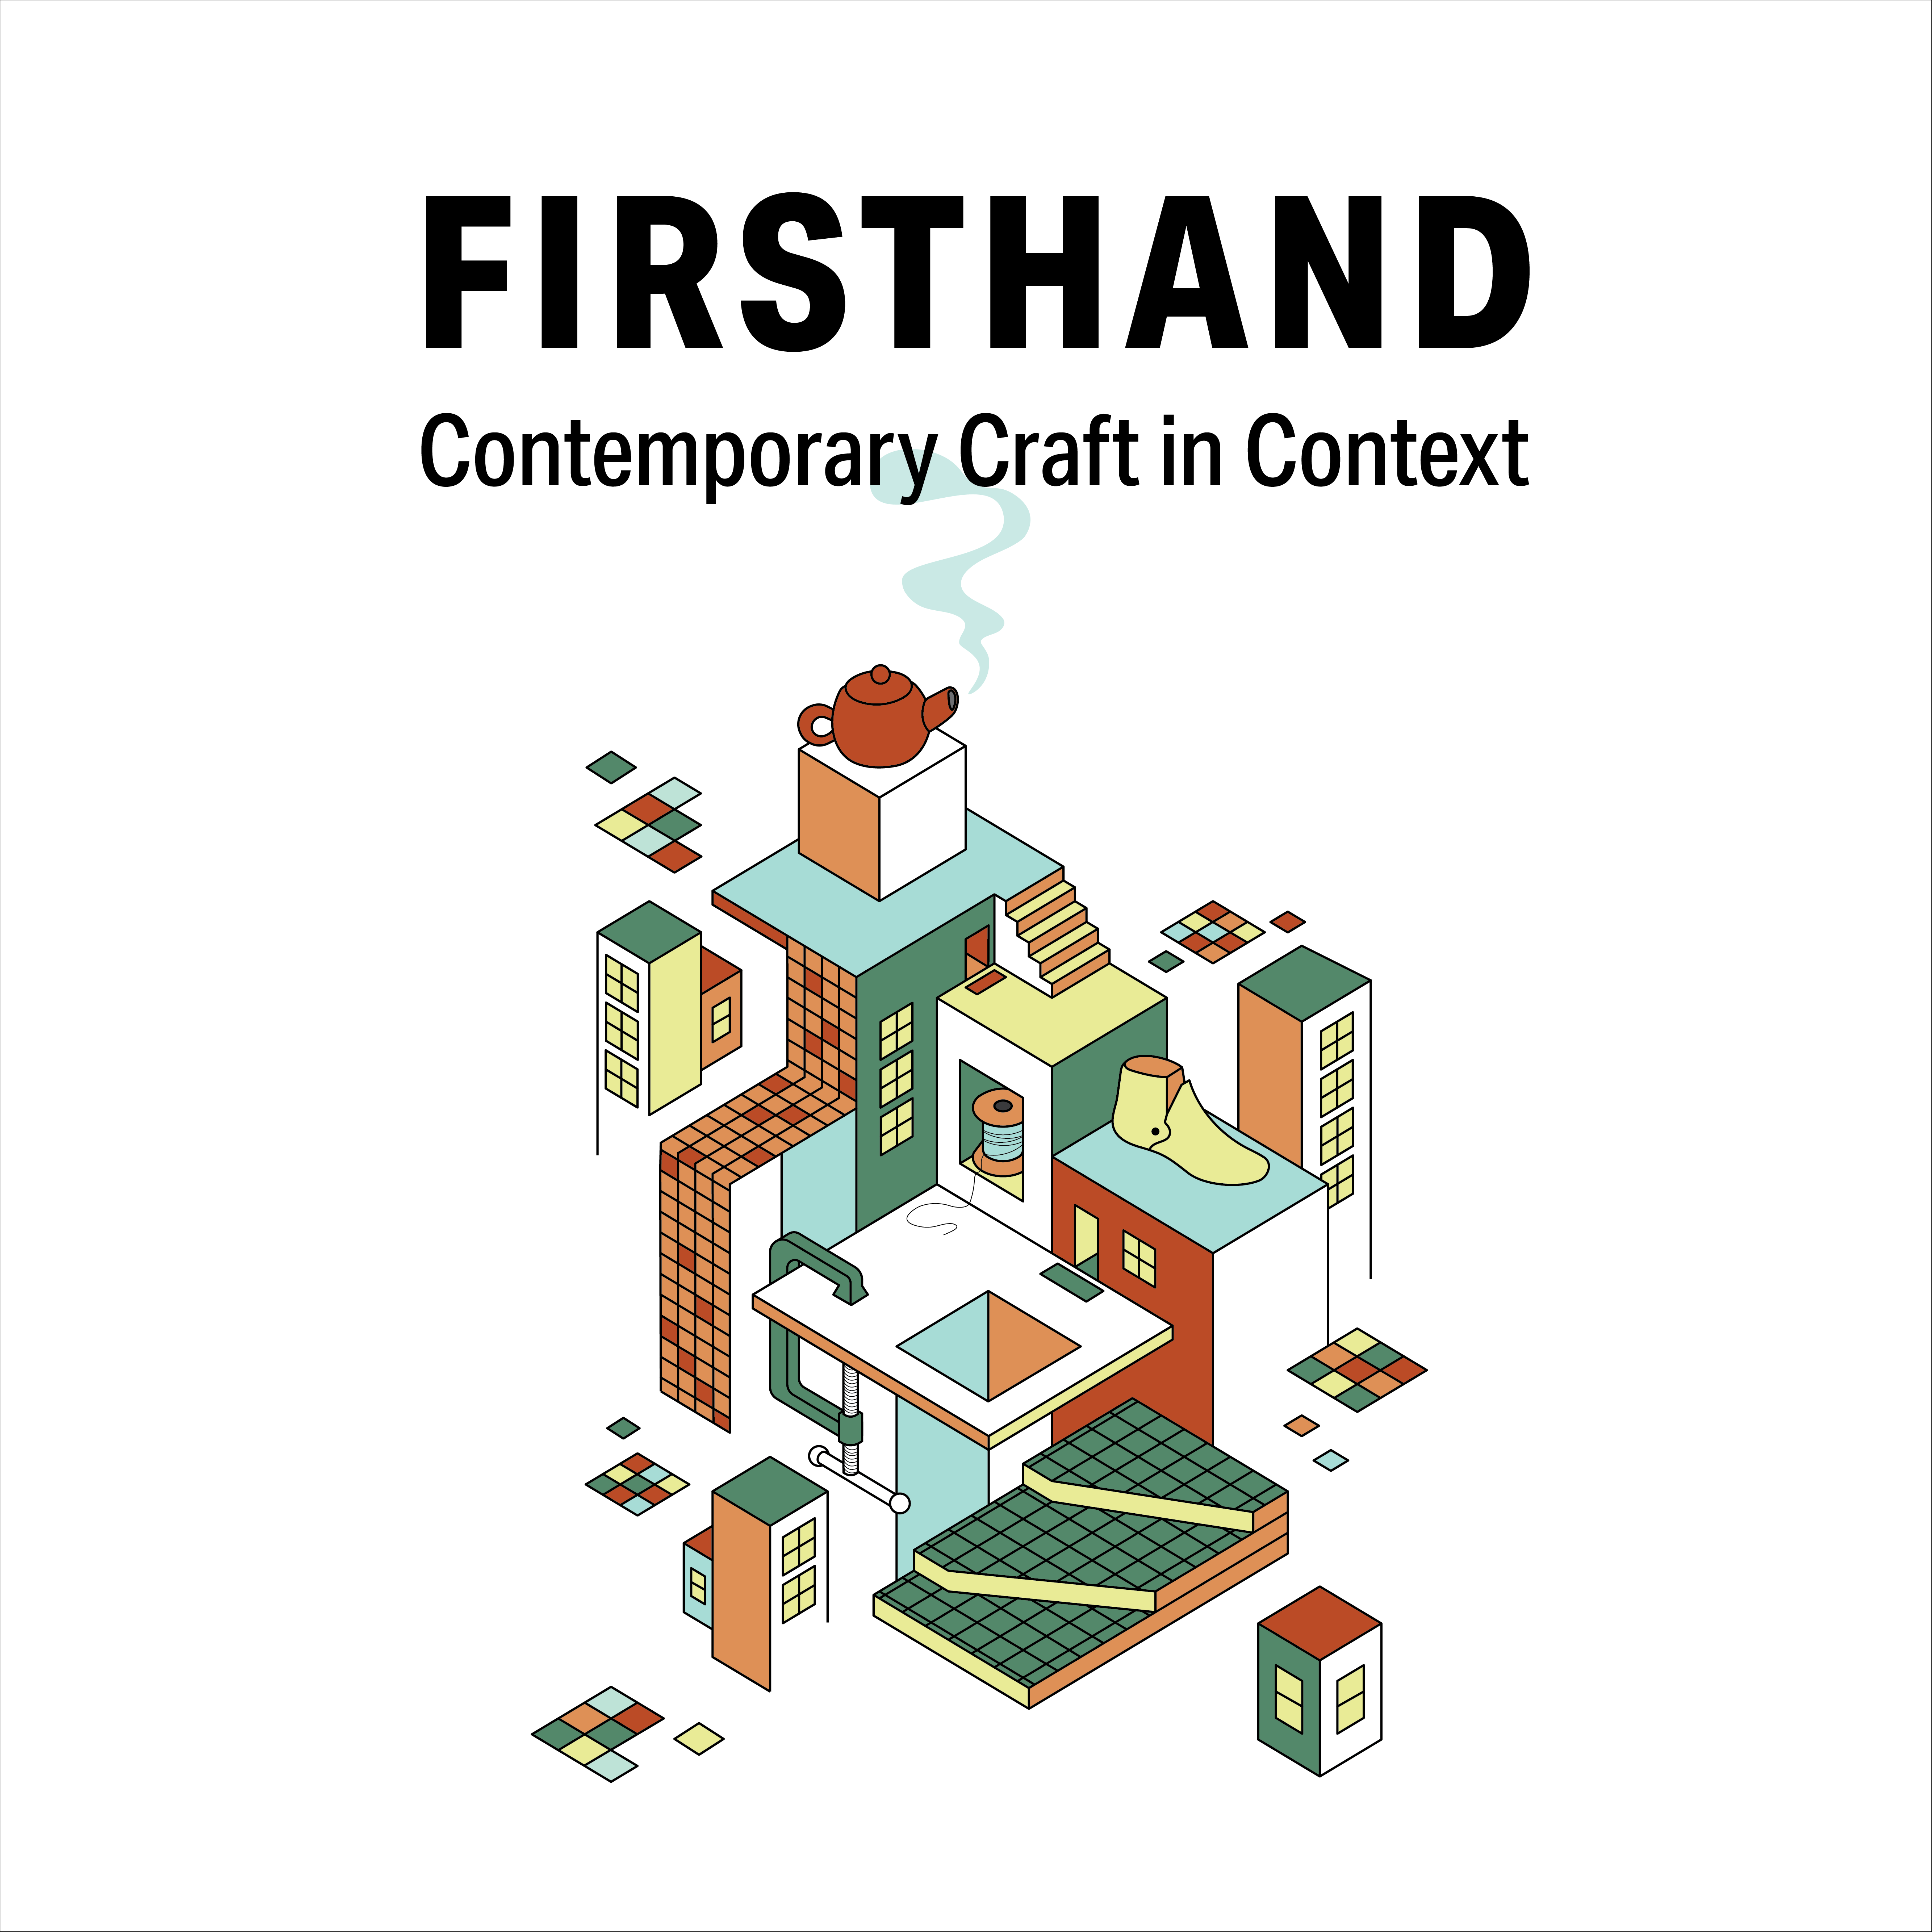 Firsthand Contemporary Craft in Context